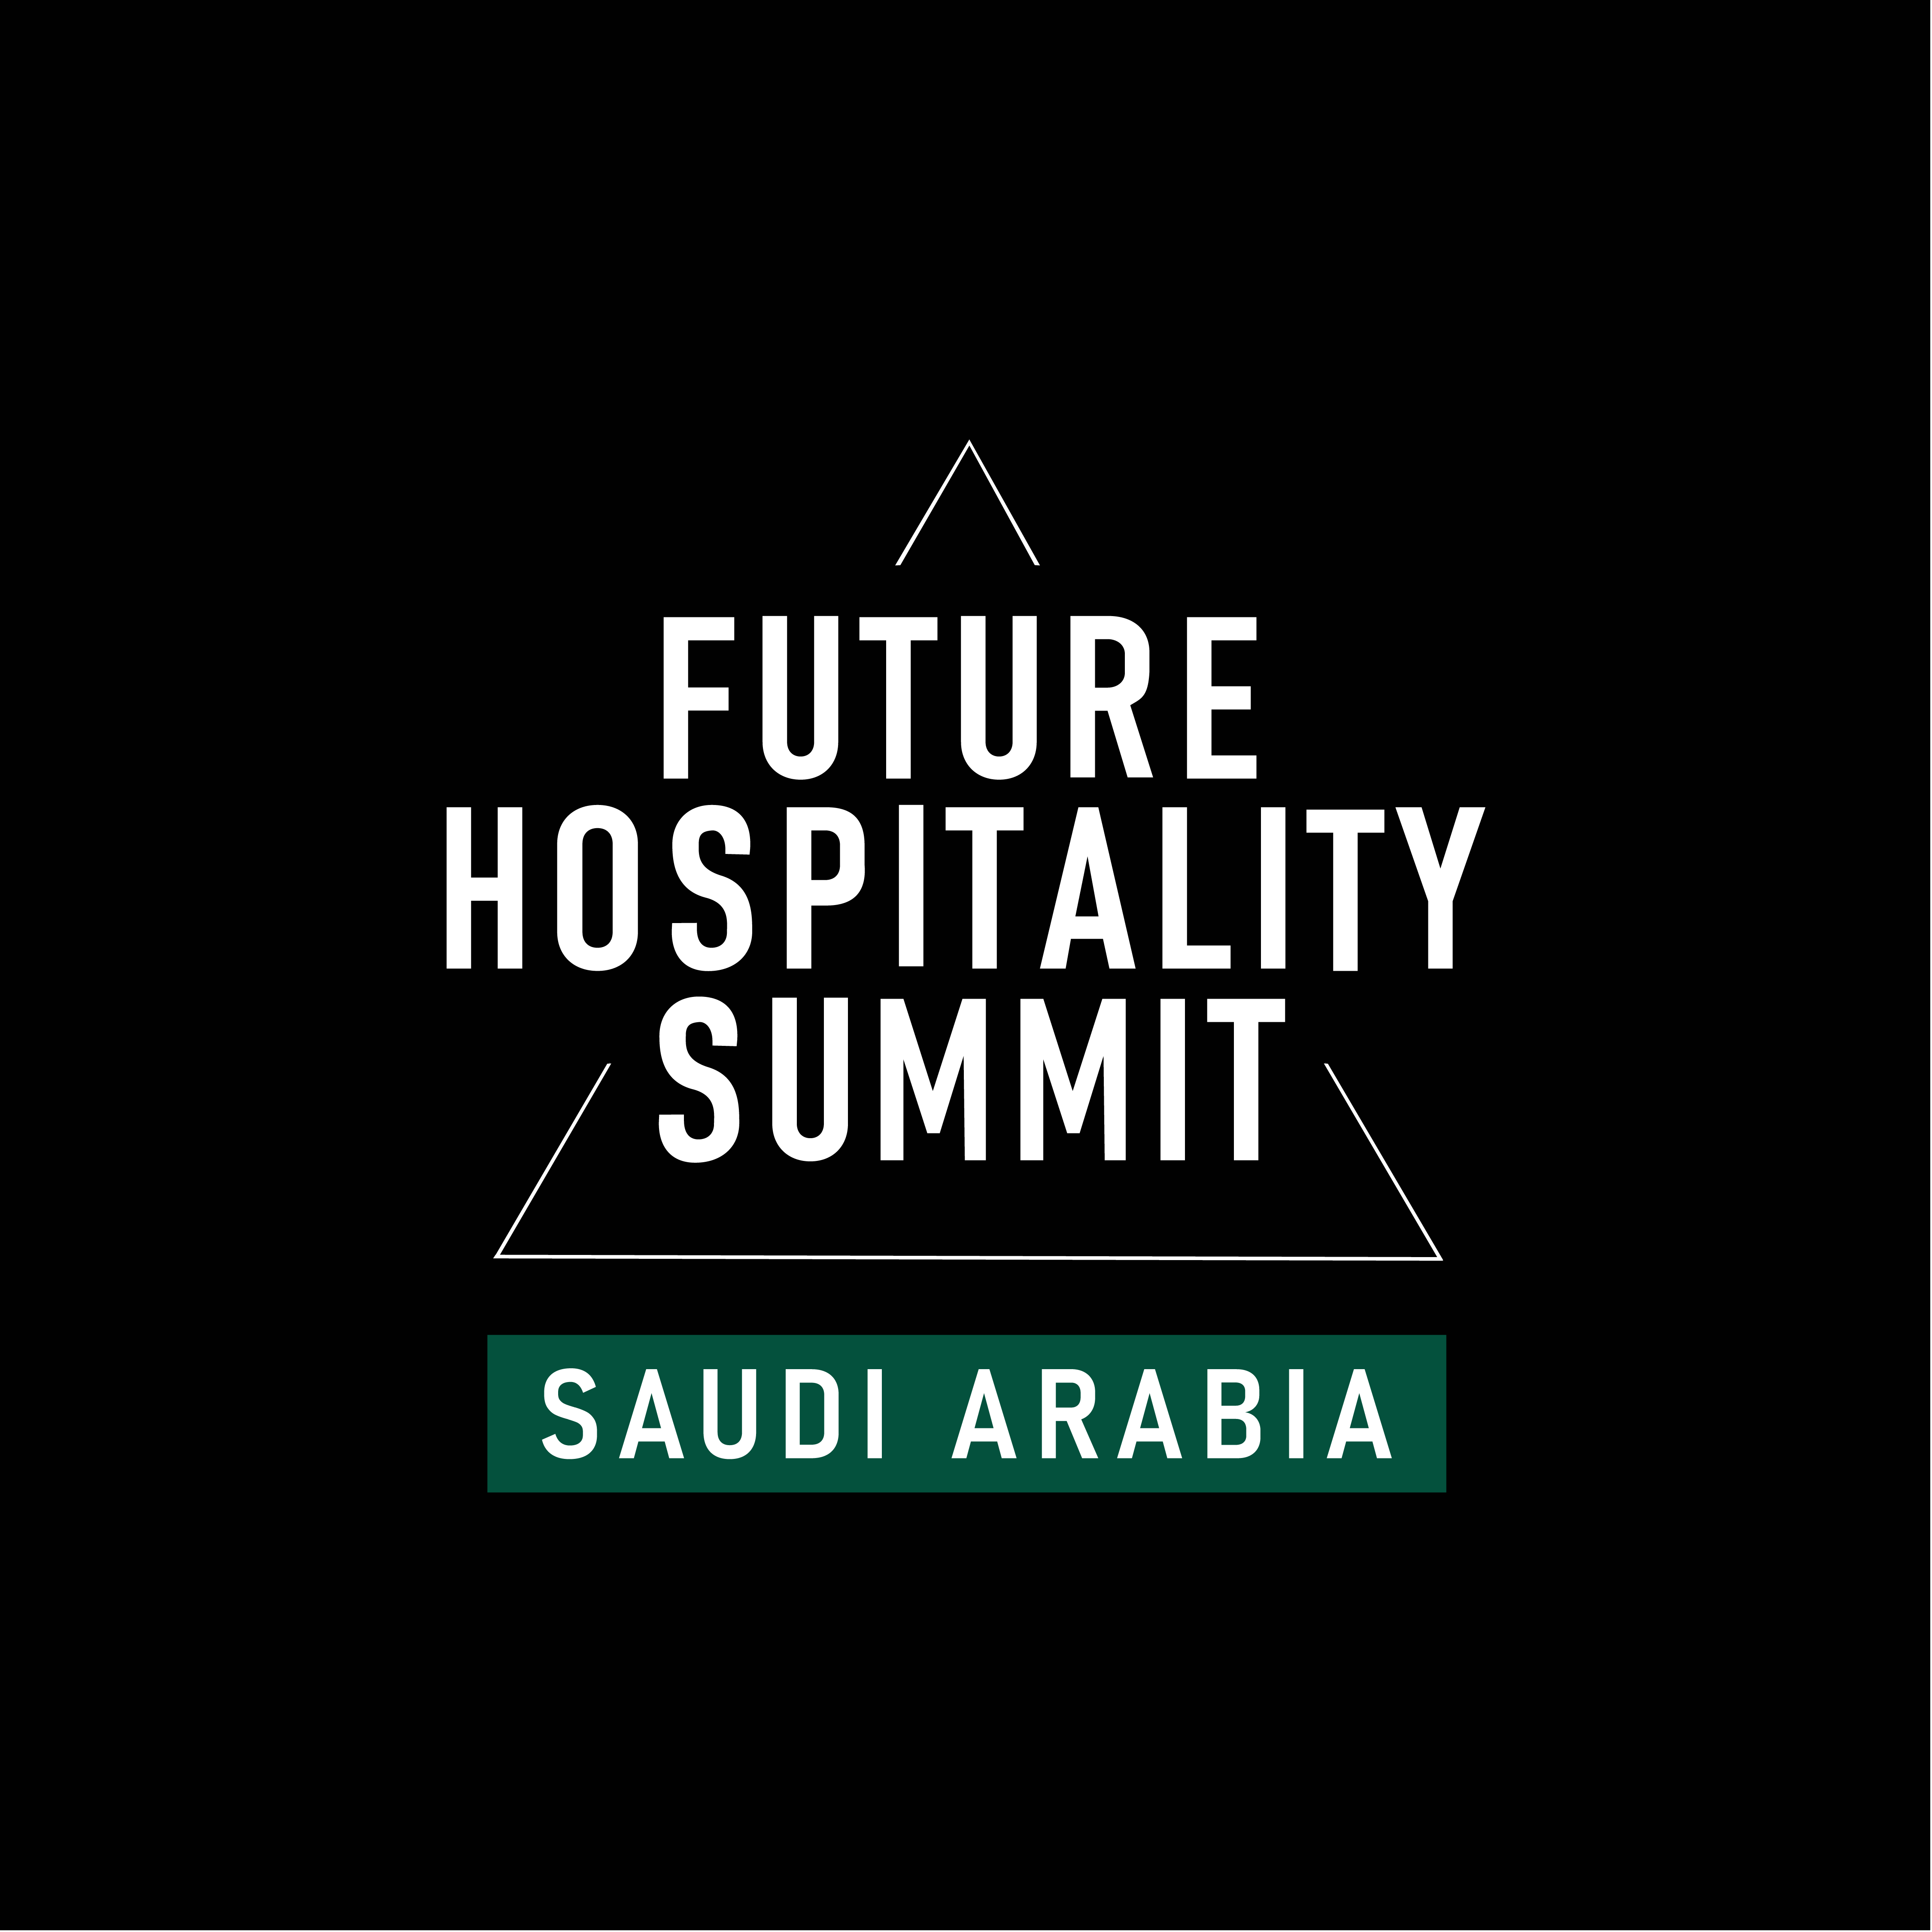 Over 100 hospitality leaders will take the stage at the Future Hospitality Summit Saudi Arabia